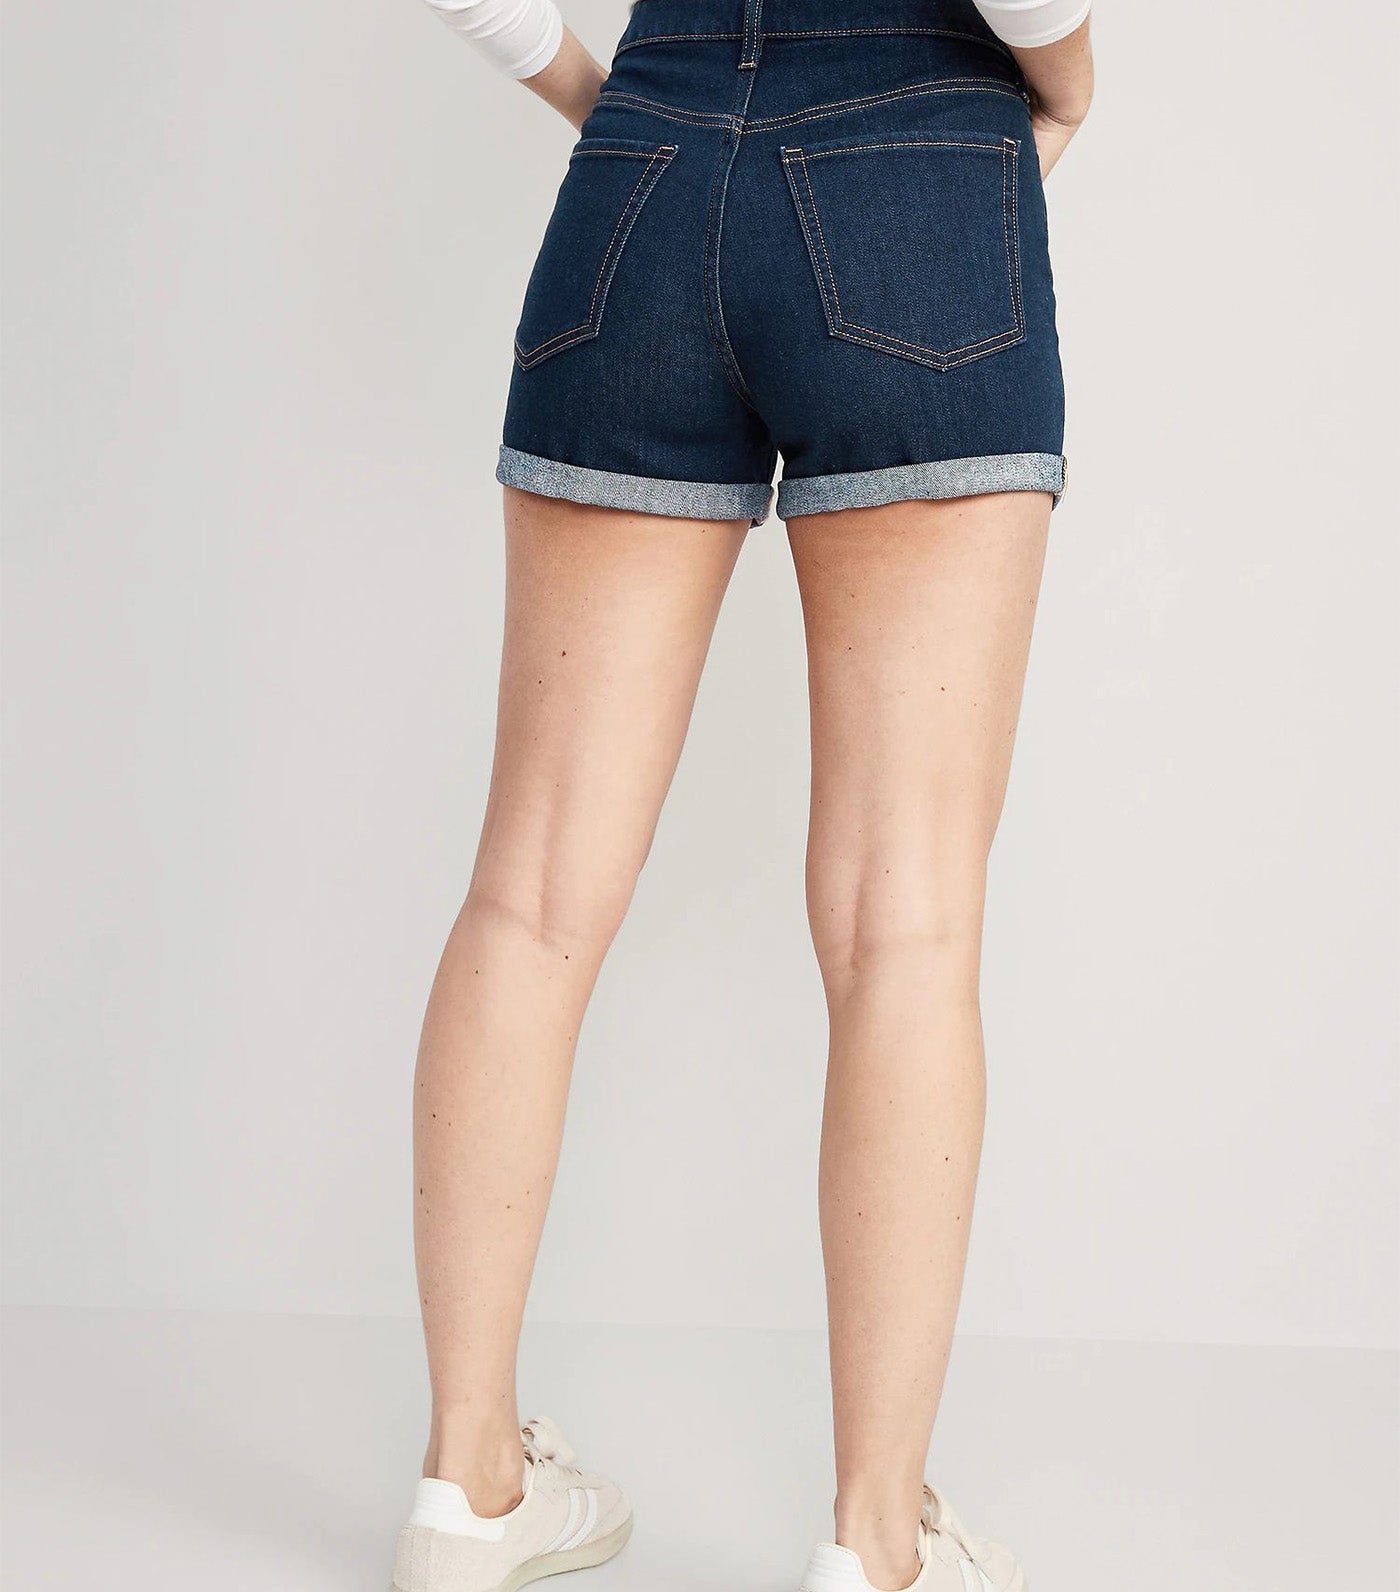 High-Waisted Wow Jean Shorts for Women - 3in Inseam Rinse